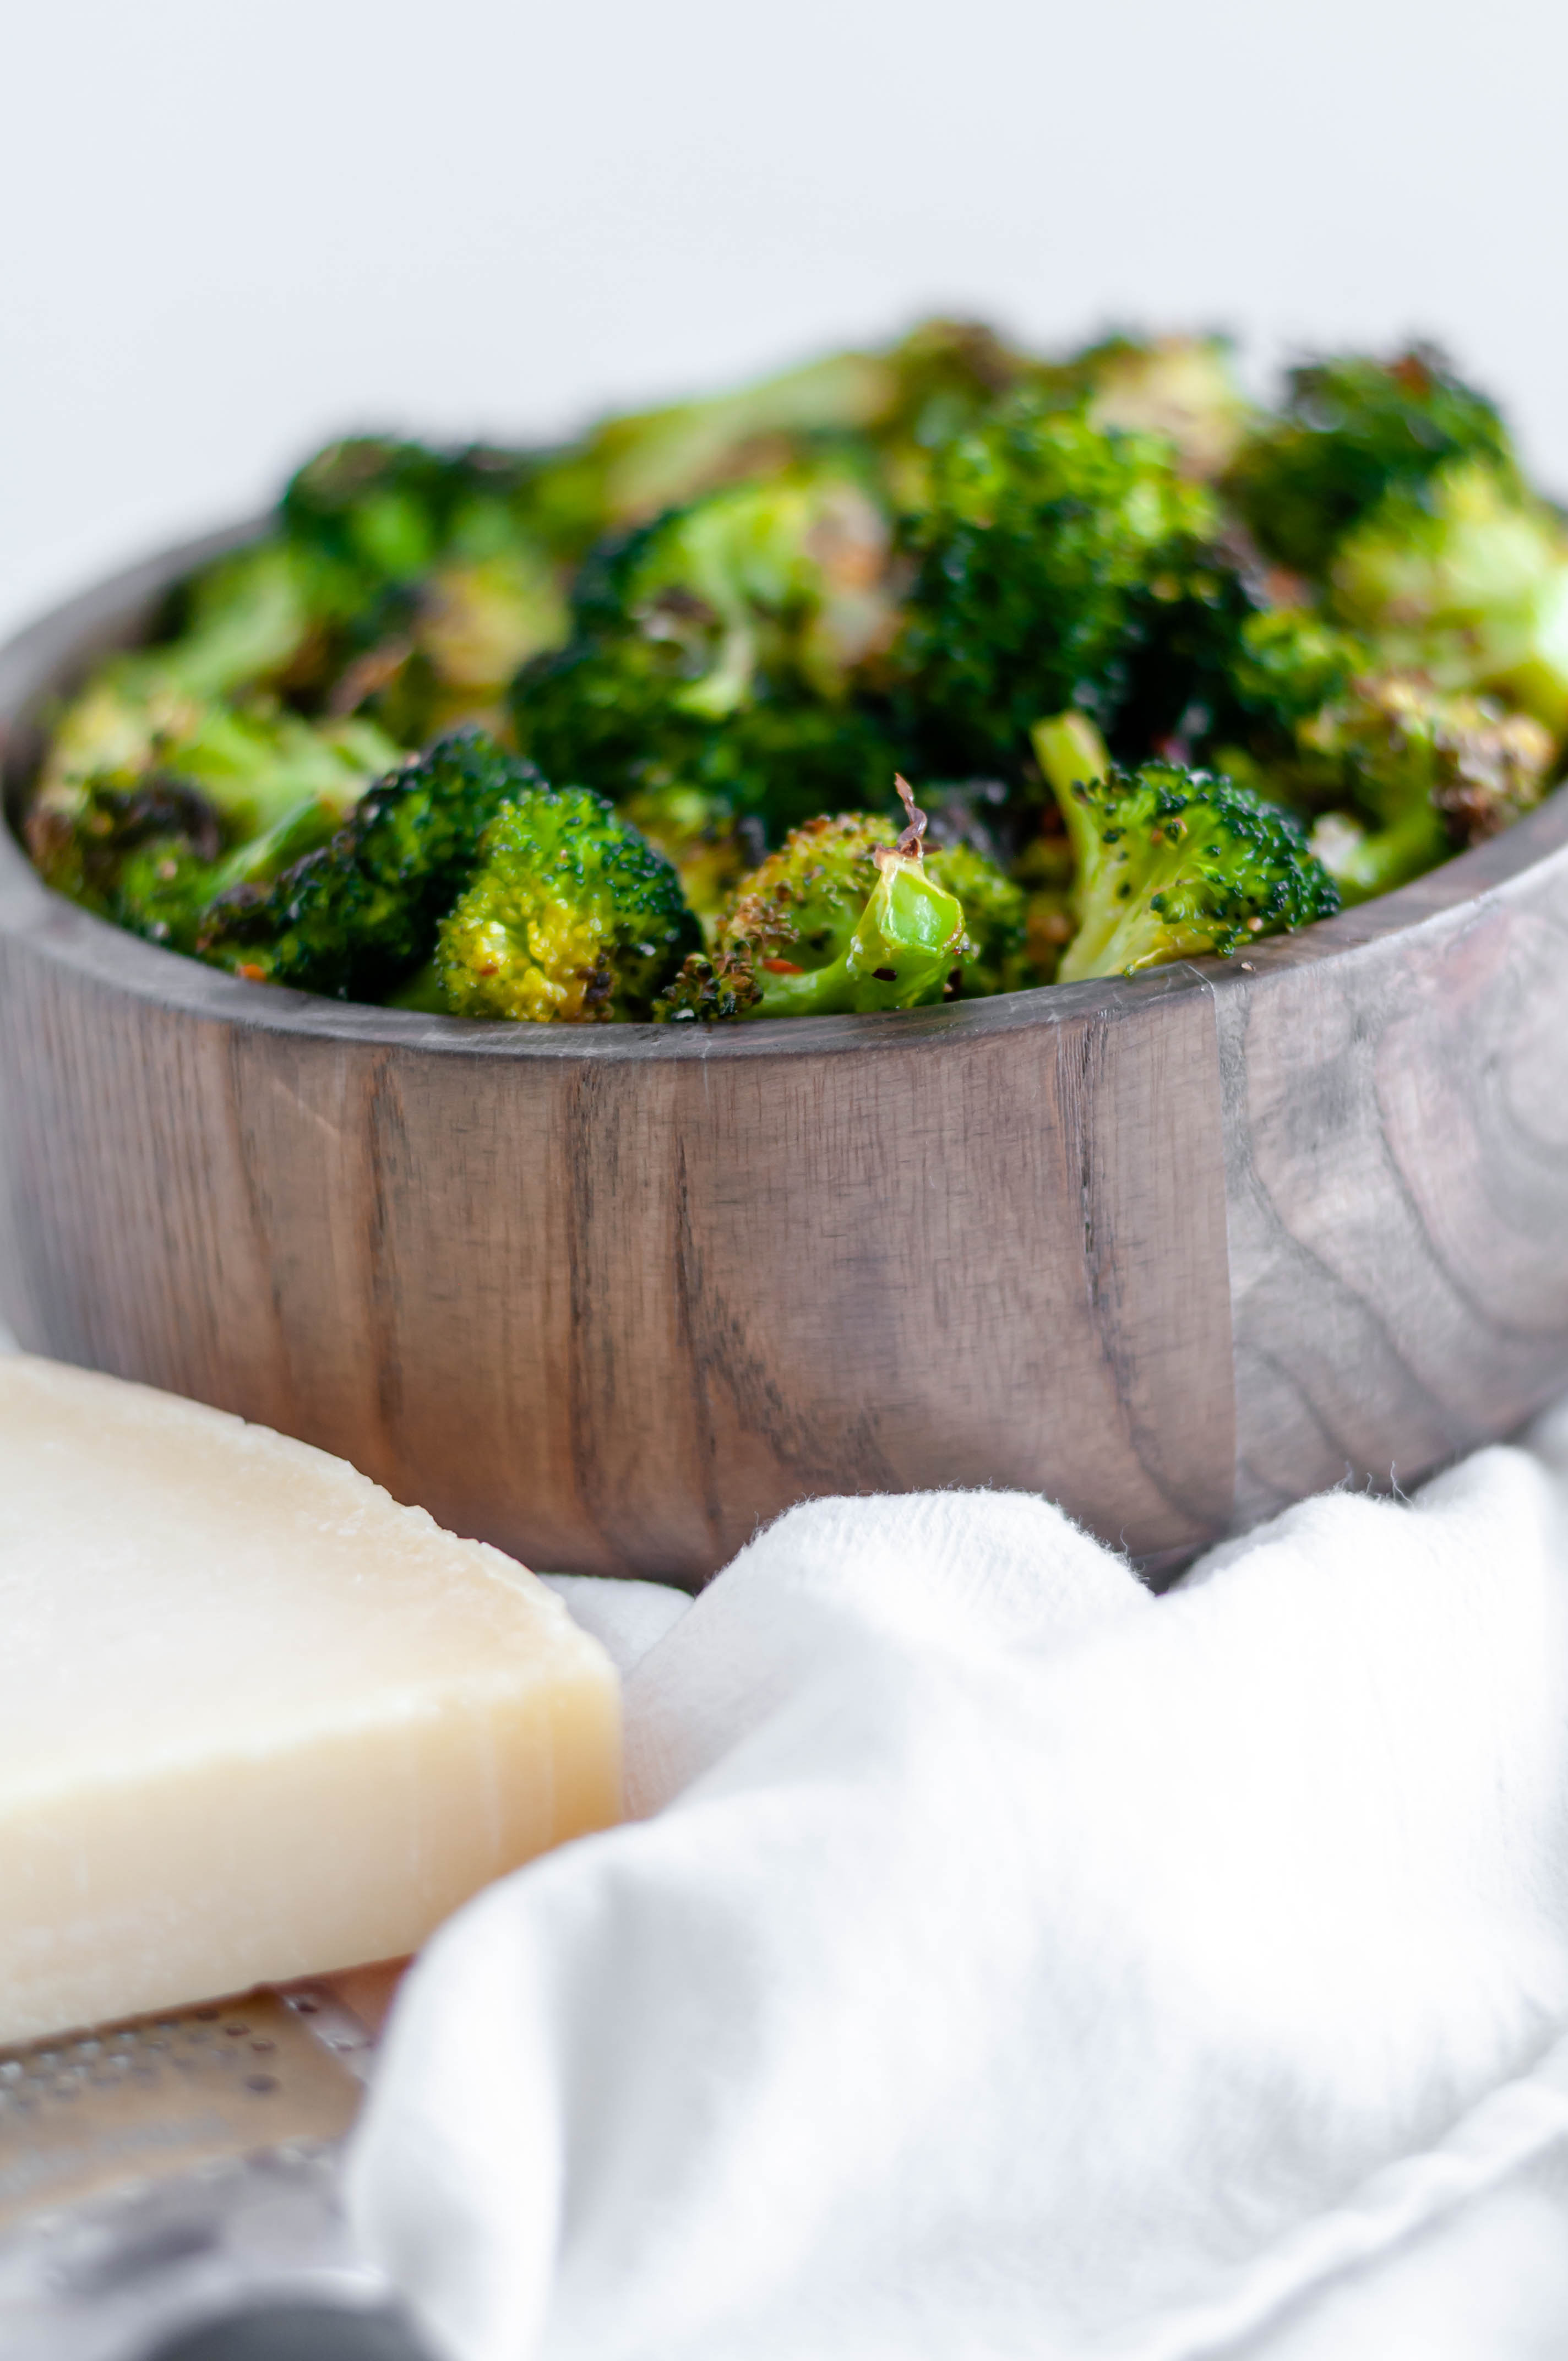 This Spicy Parmesan Roasted Broccoli is a great option for a weeknight side dish. Four simple ingredients are all you need to get this on the table.